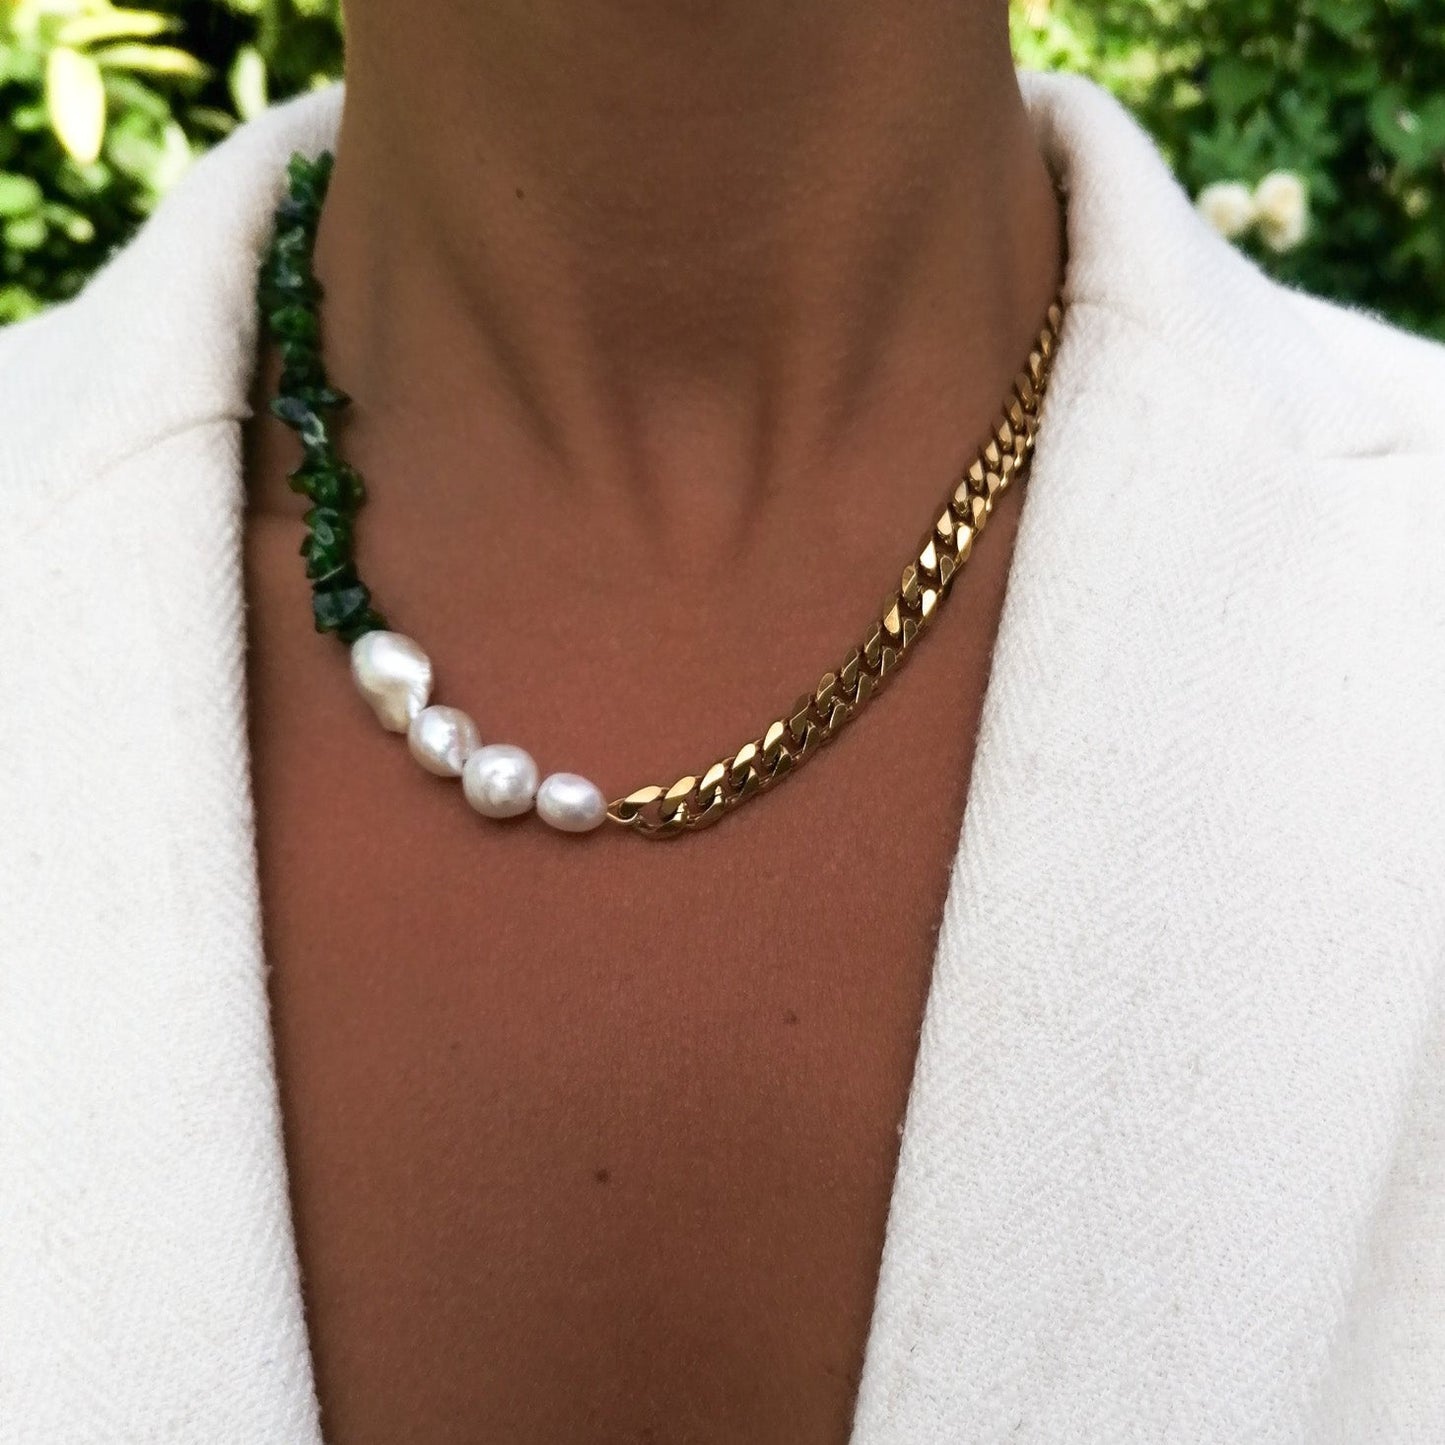 Chromdiopside and pearl necklace